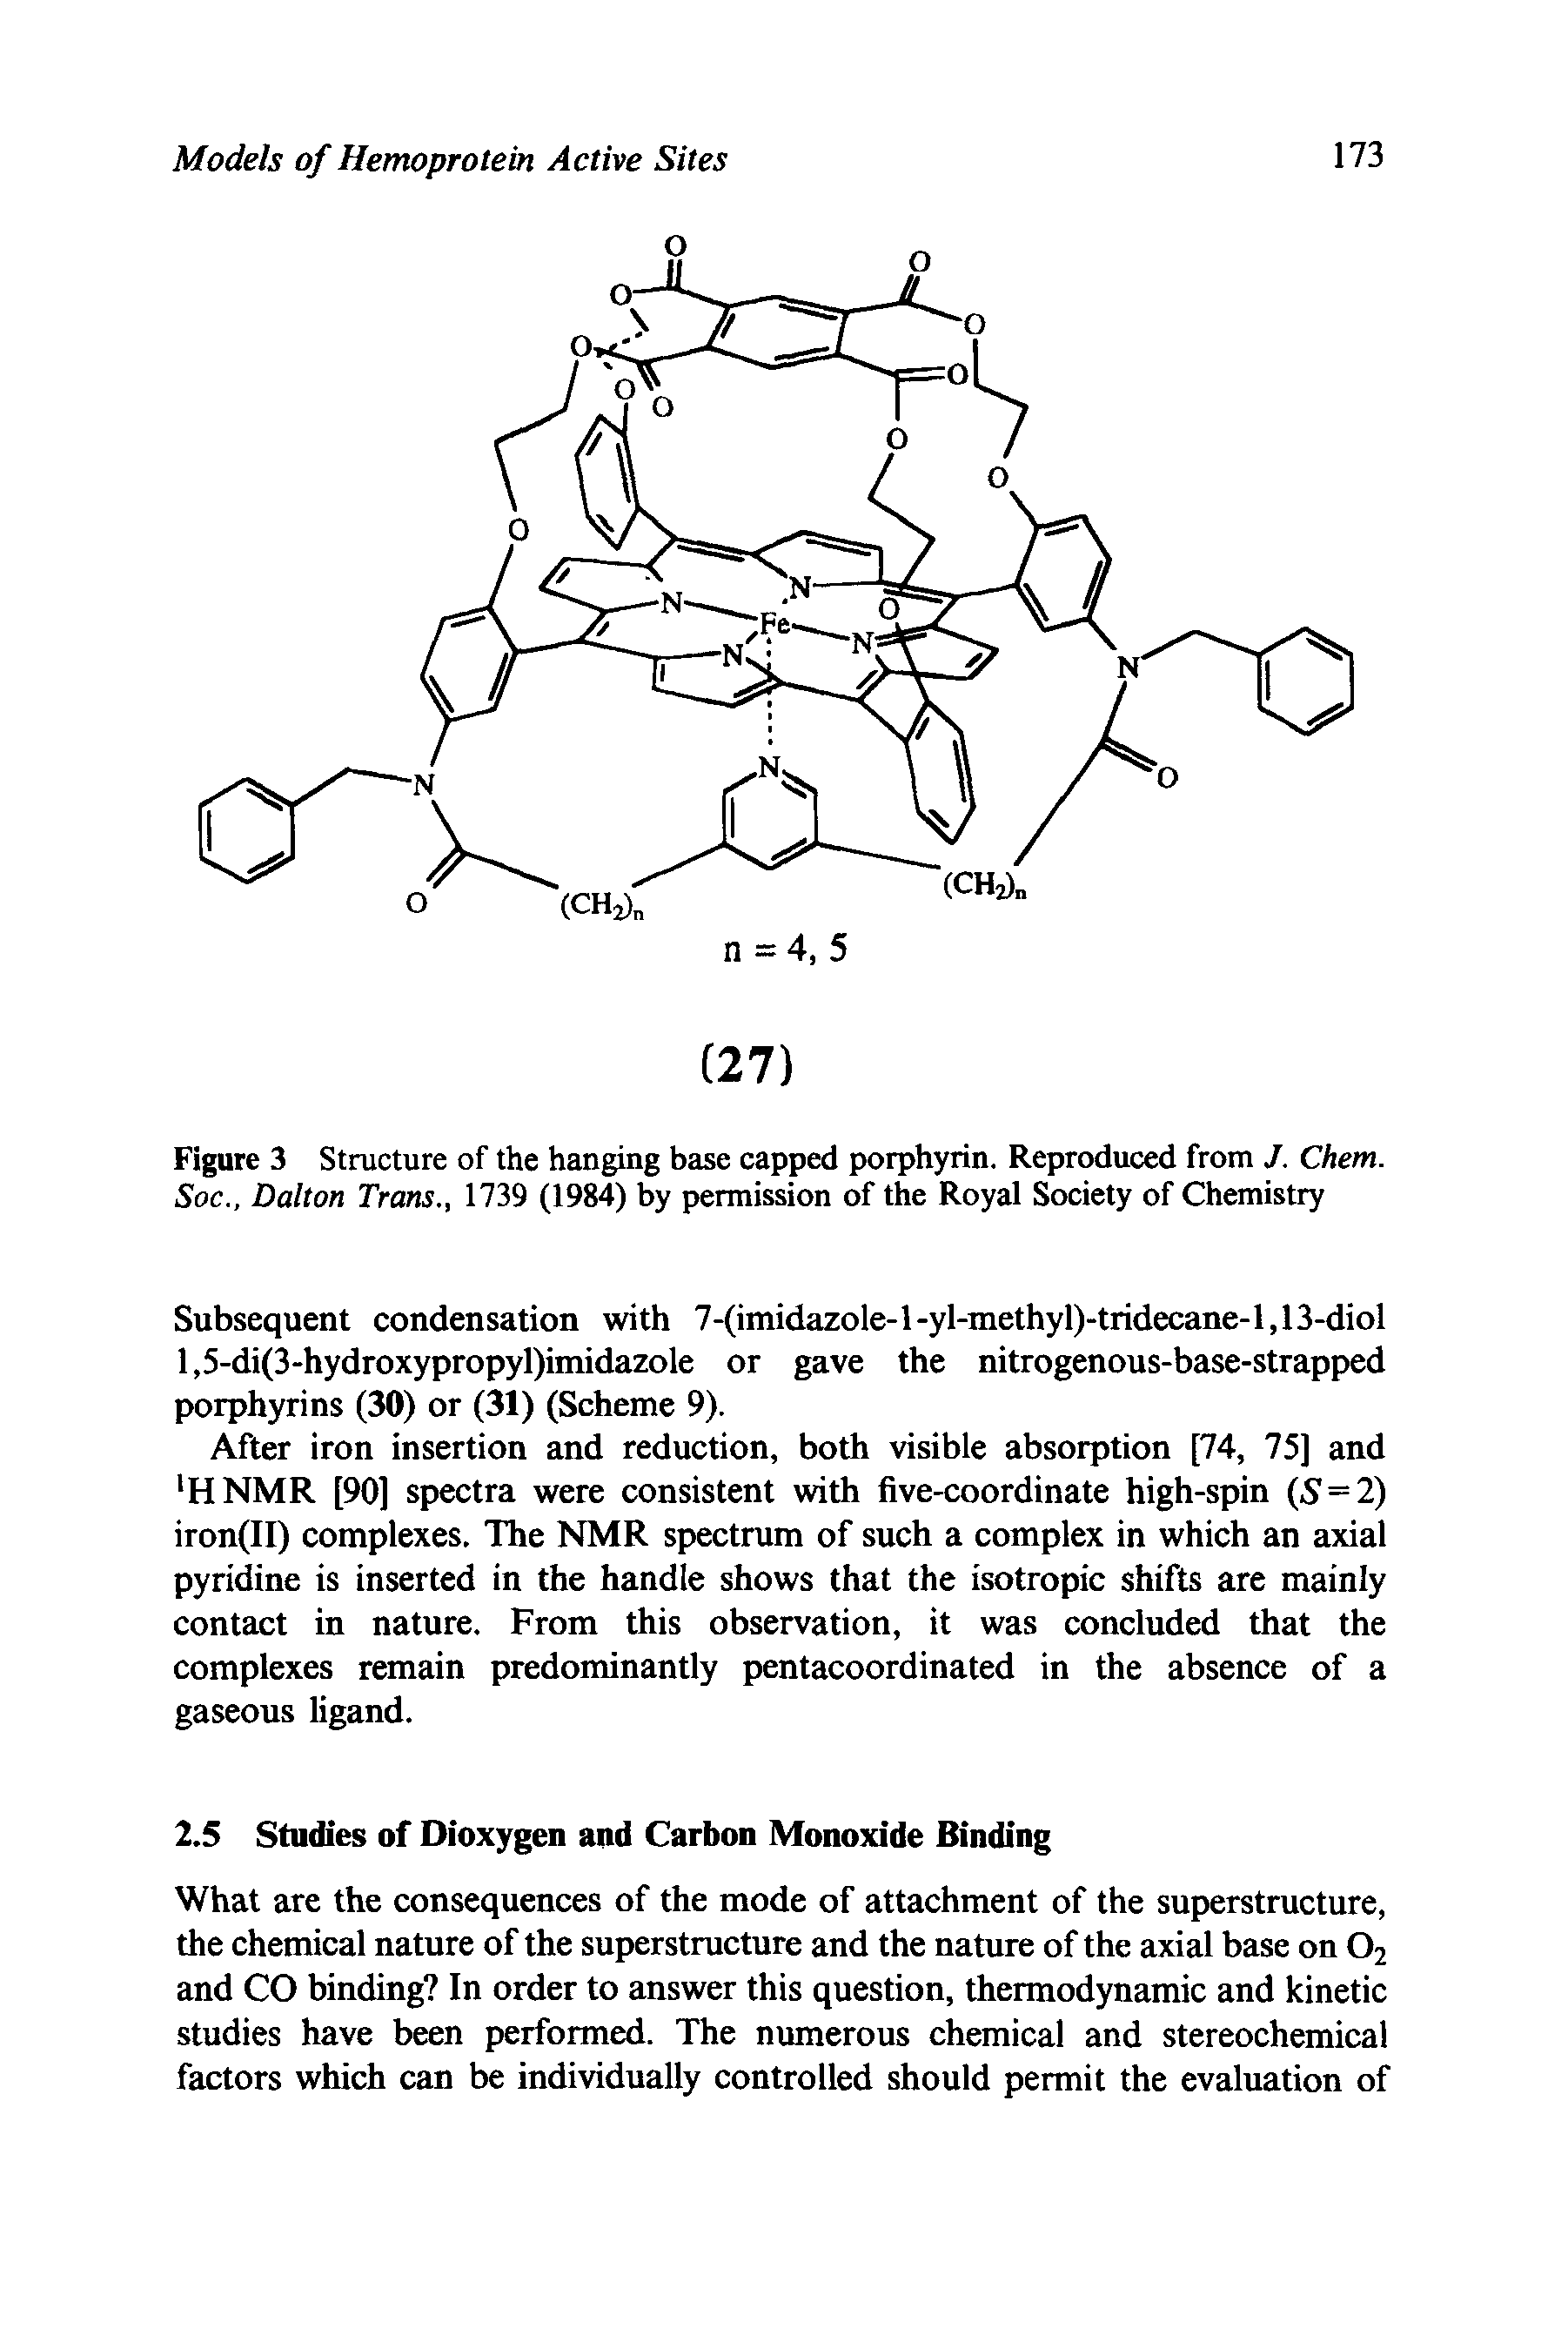 Figure 3 Structure of the hanging base capped porphyrin. Reproduced from J. Chem. Soc., Dalton Trans., 1739 (1984) by permission of the Royal Society of Chemistry...